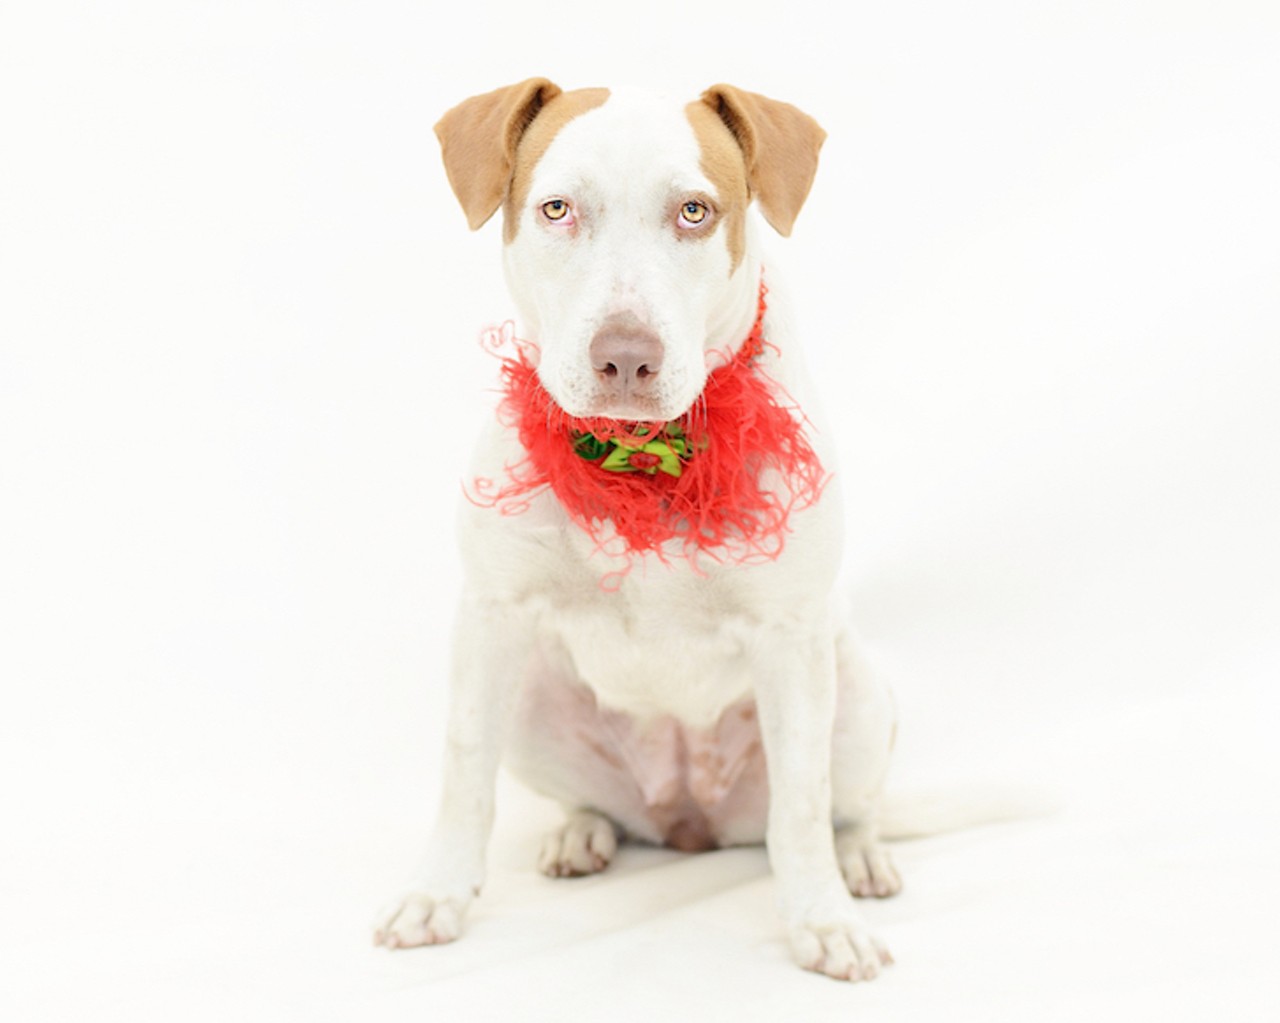 19 adoptable dogs that would love to spend the holidays with you